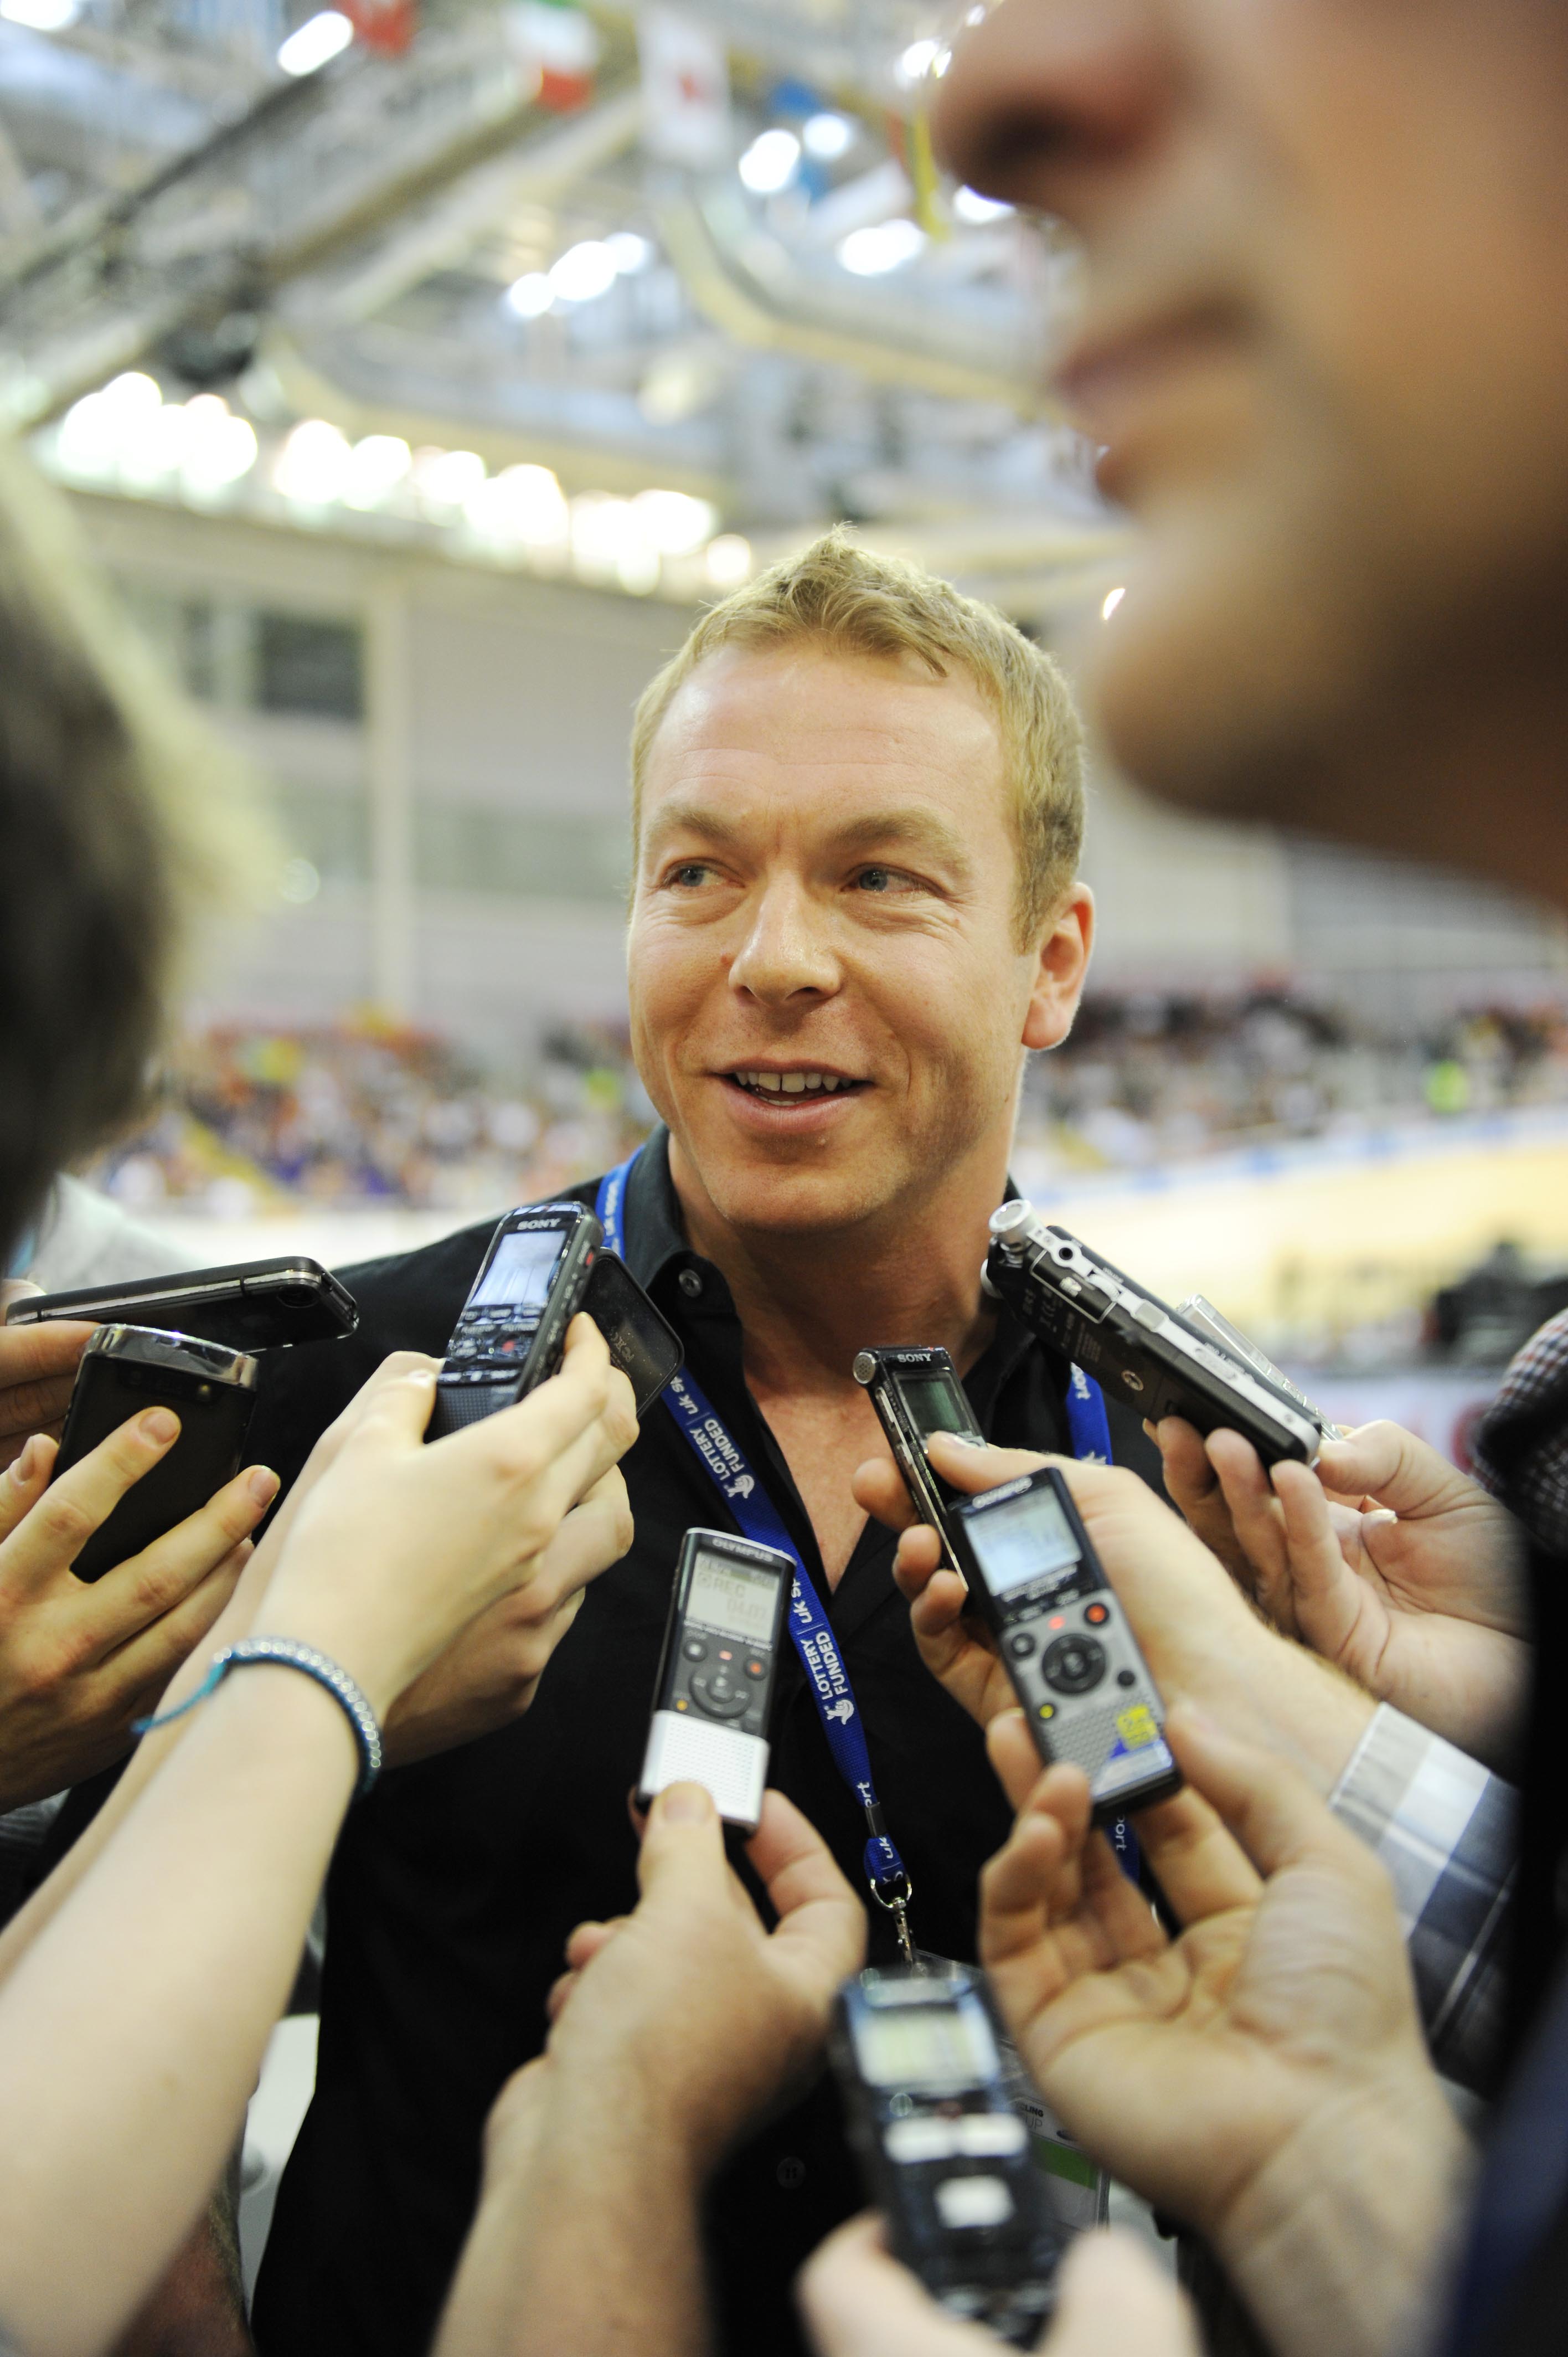 Sir Chris Hoy at UCI Track World Cup 2